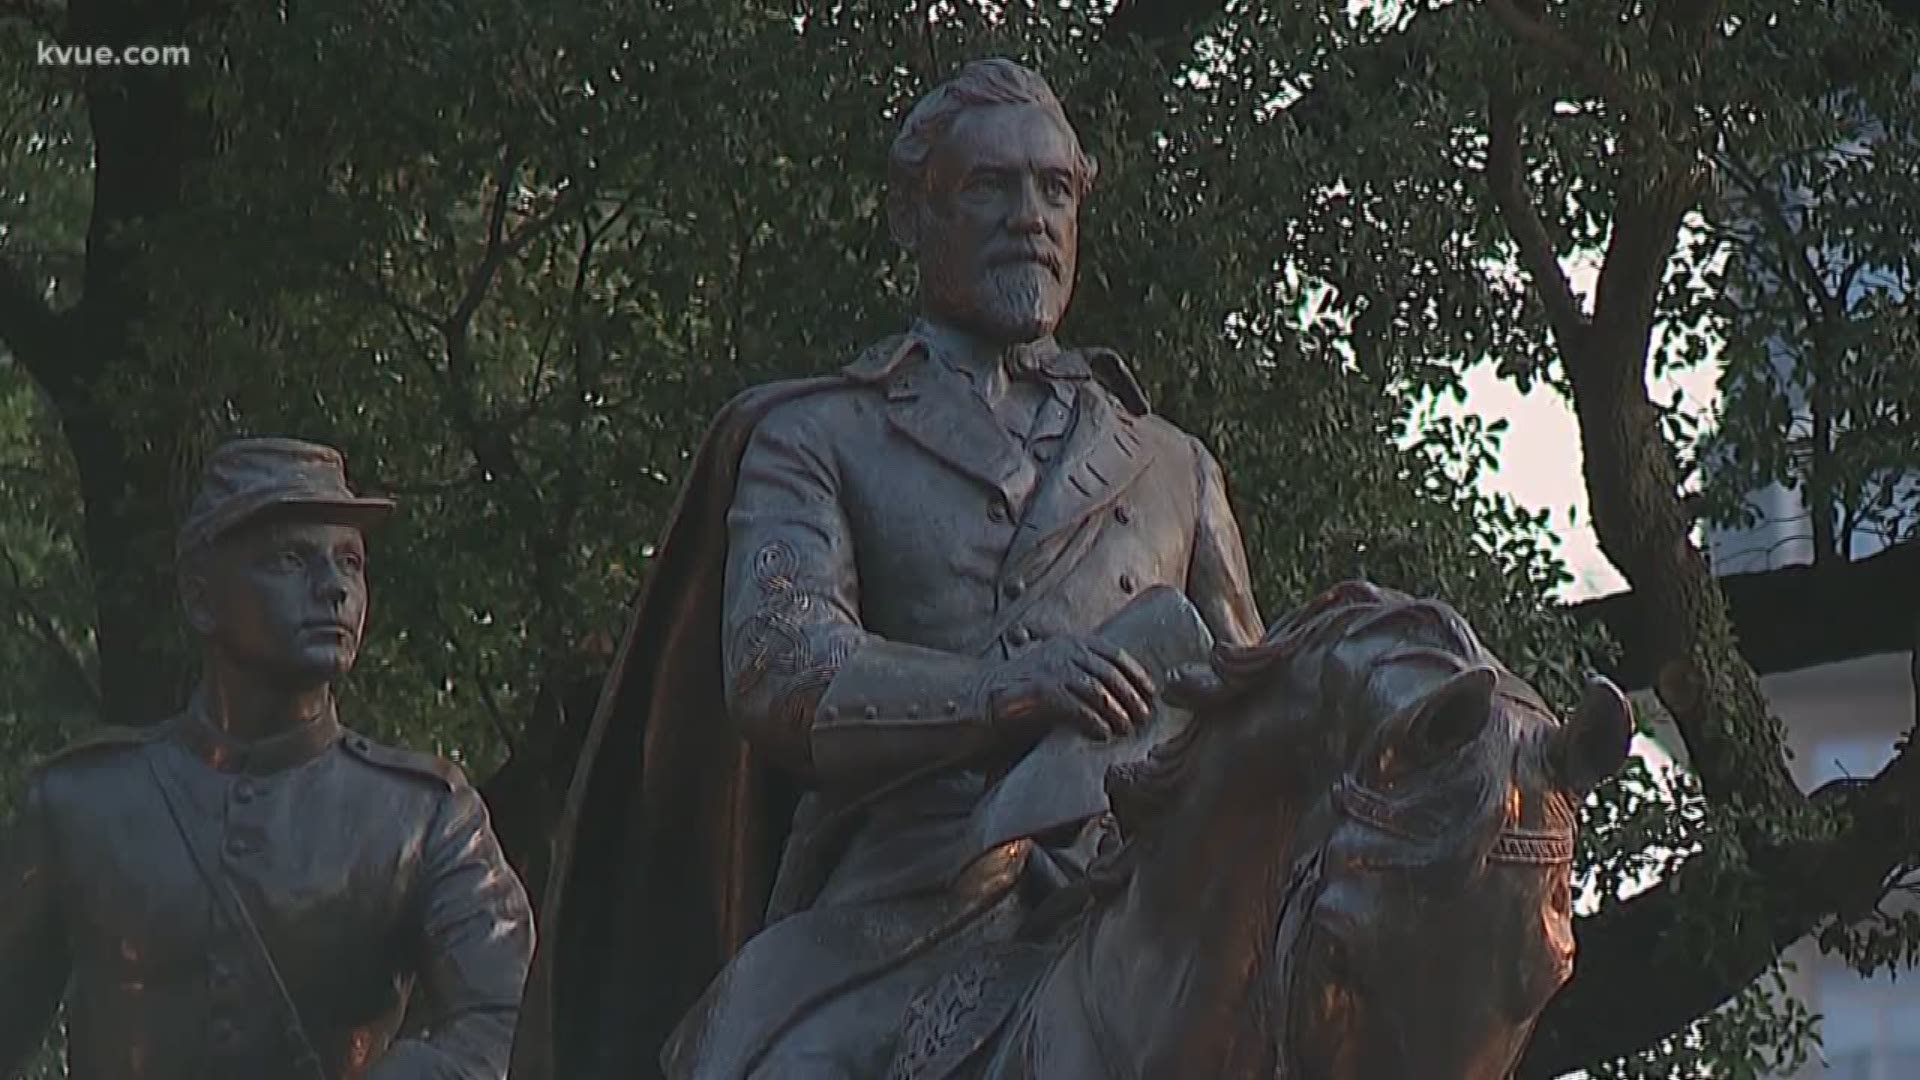 Today is Confederate Heroes Day - a state holiday meant to recognize those who fought in the Civil War.